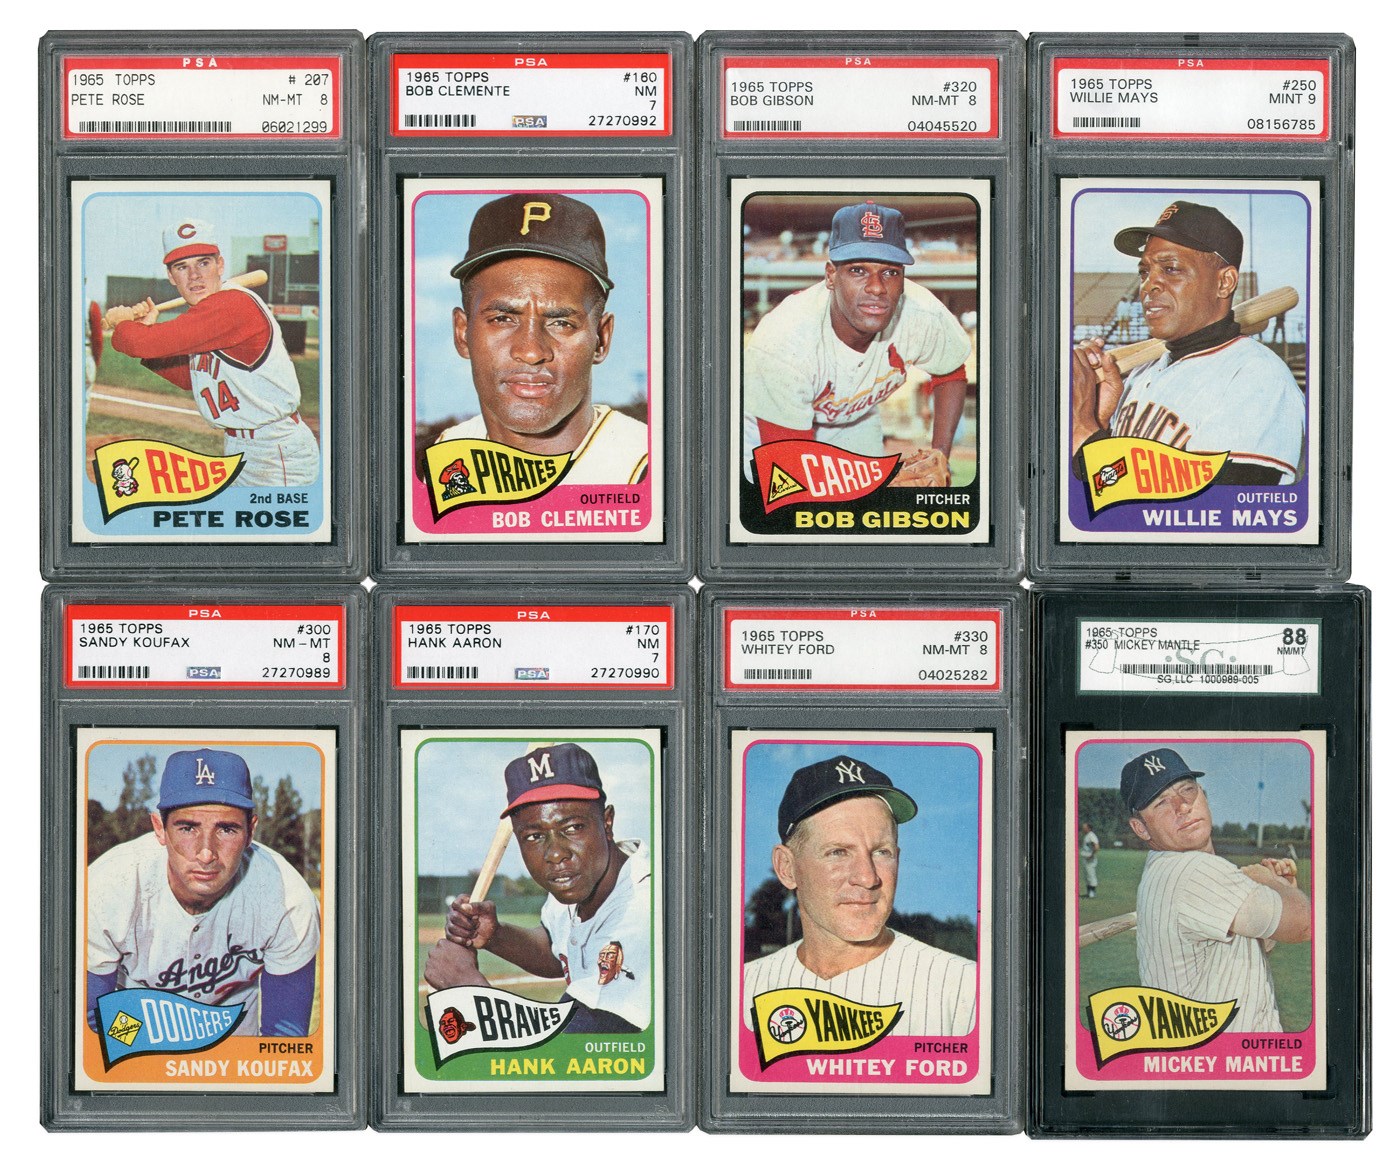 - 1965 Topps Exceptional HIGH GRADE Complete Set with PSA Graded including PSA MINT 9 Willie Mays